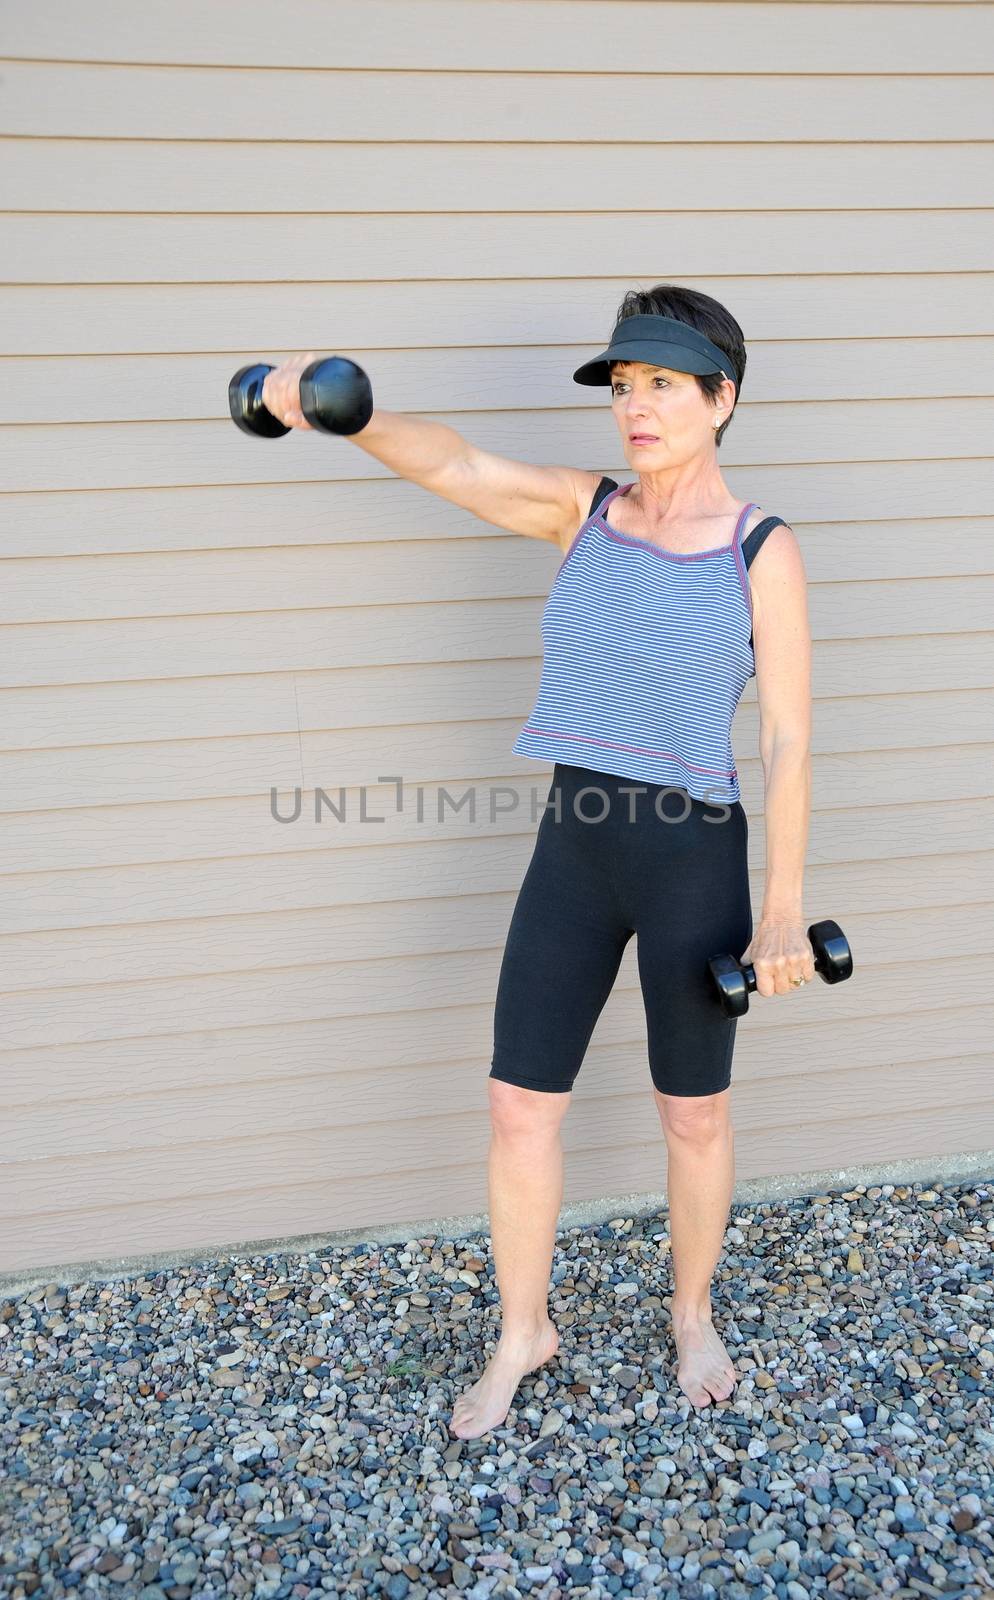 Mature female beauty working out with hand weights outside.